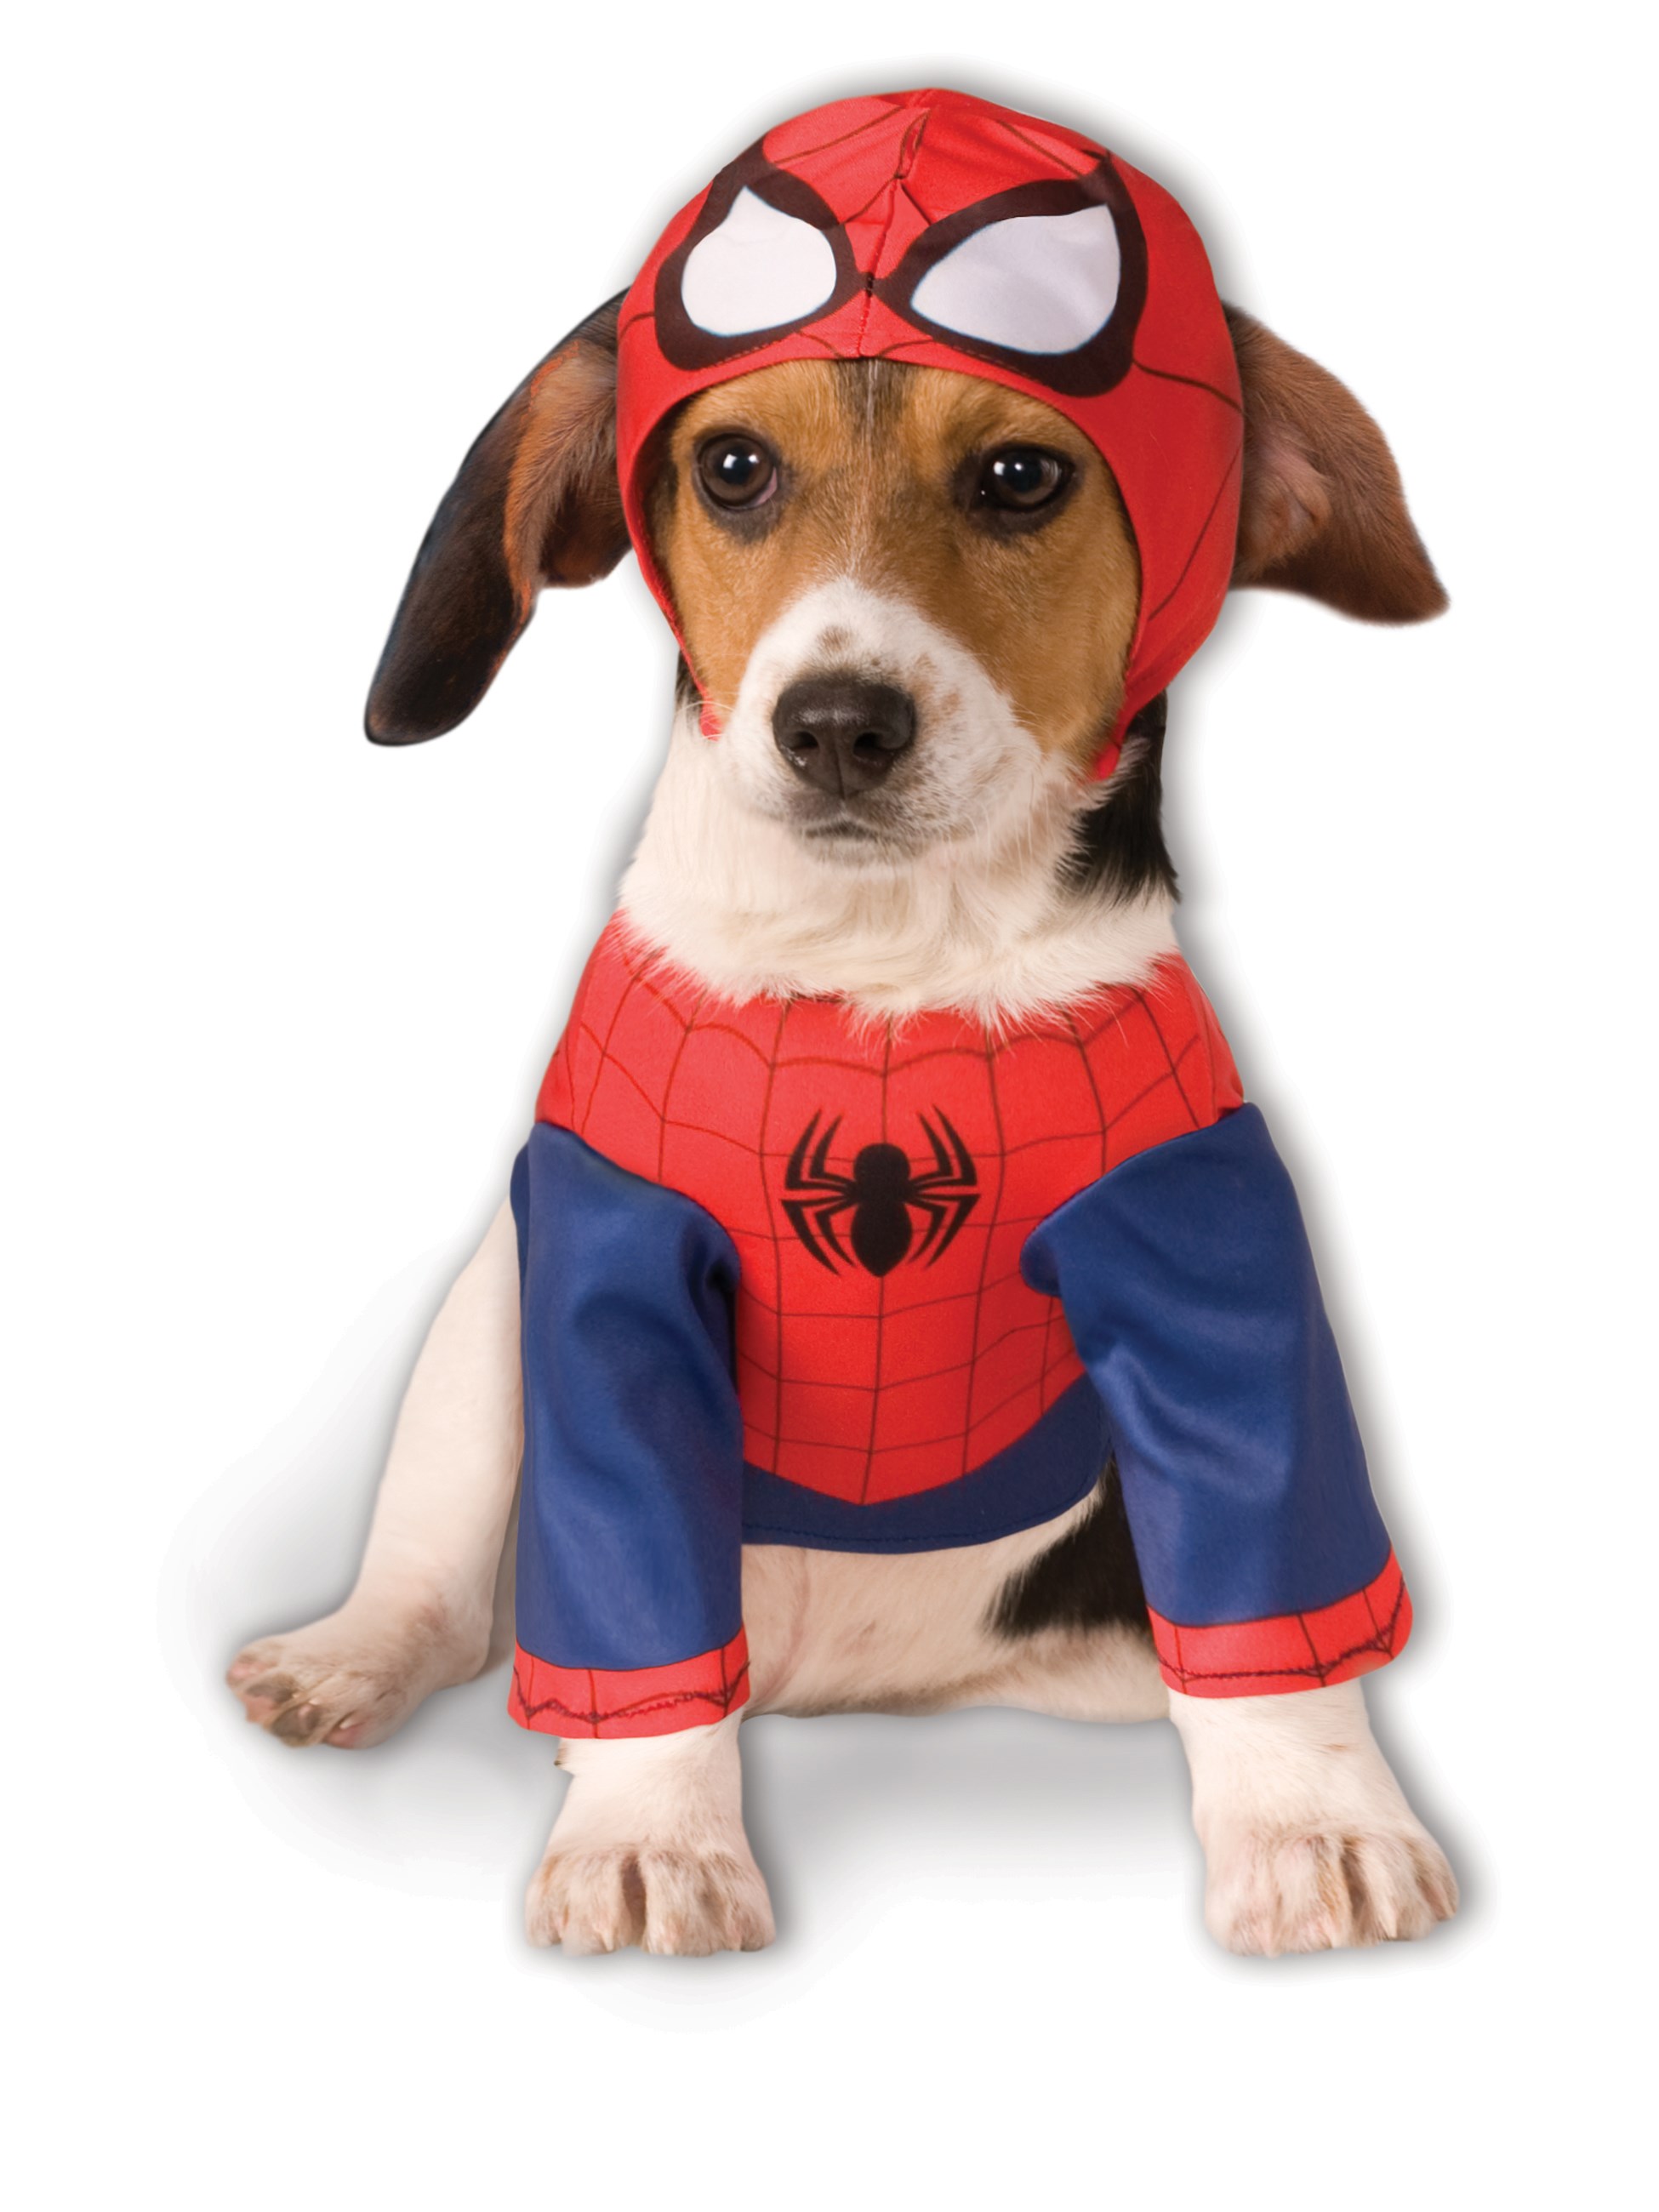 Spider-Man Costume For Pets